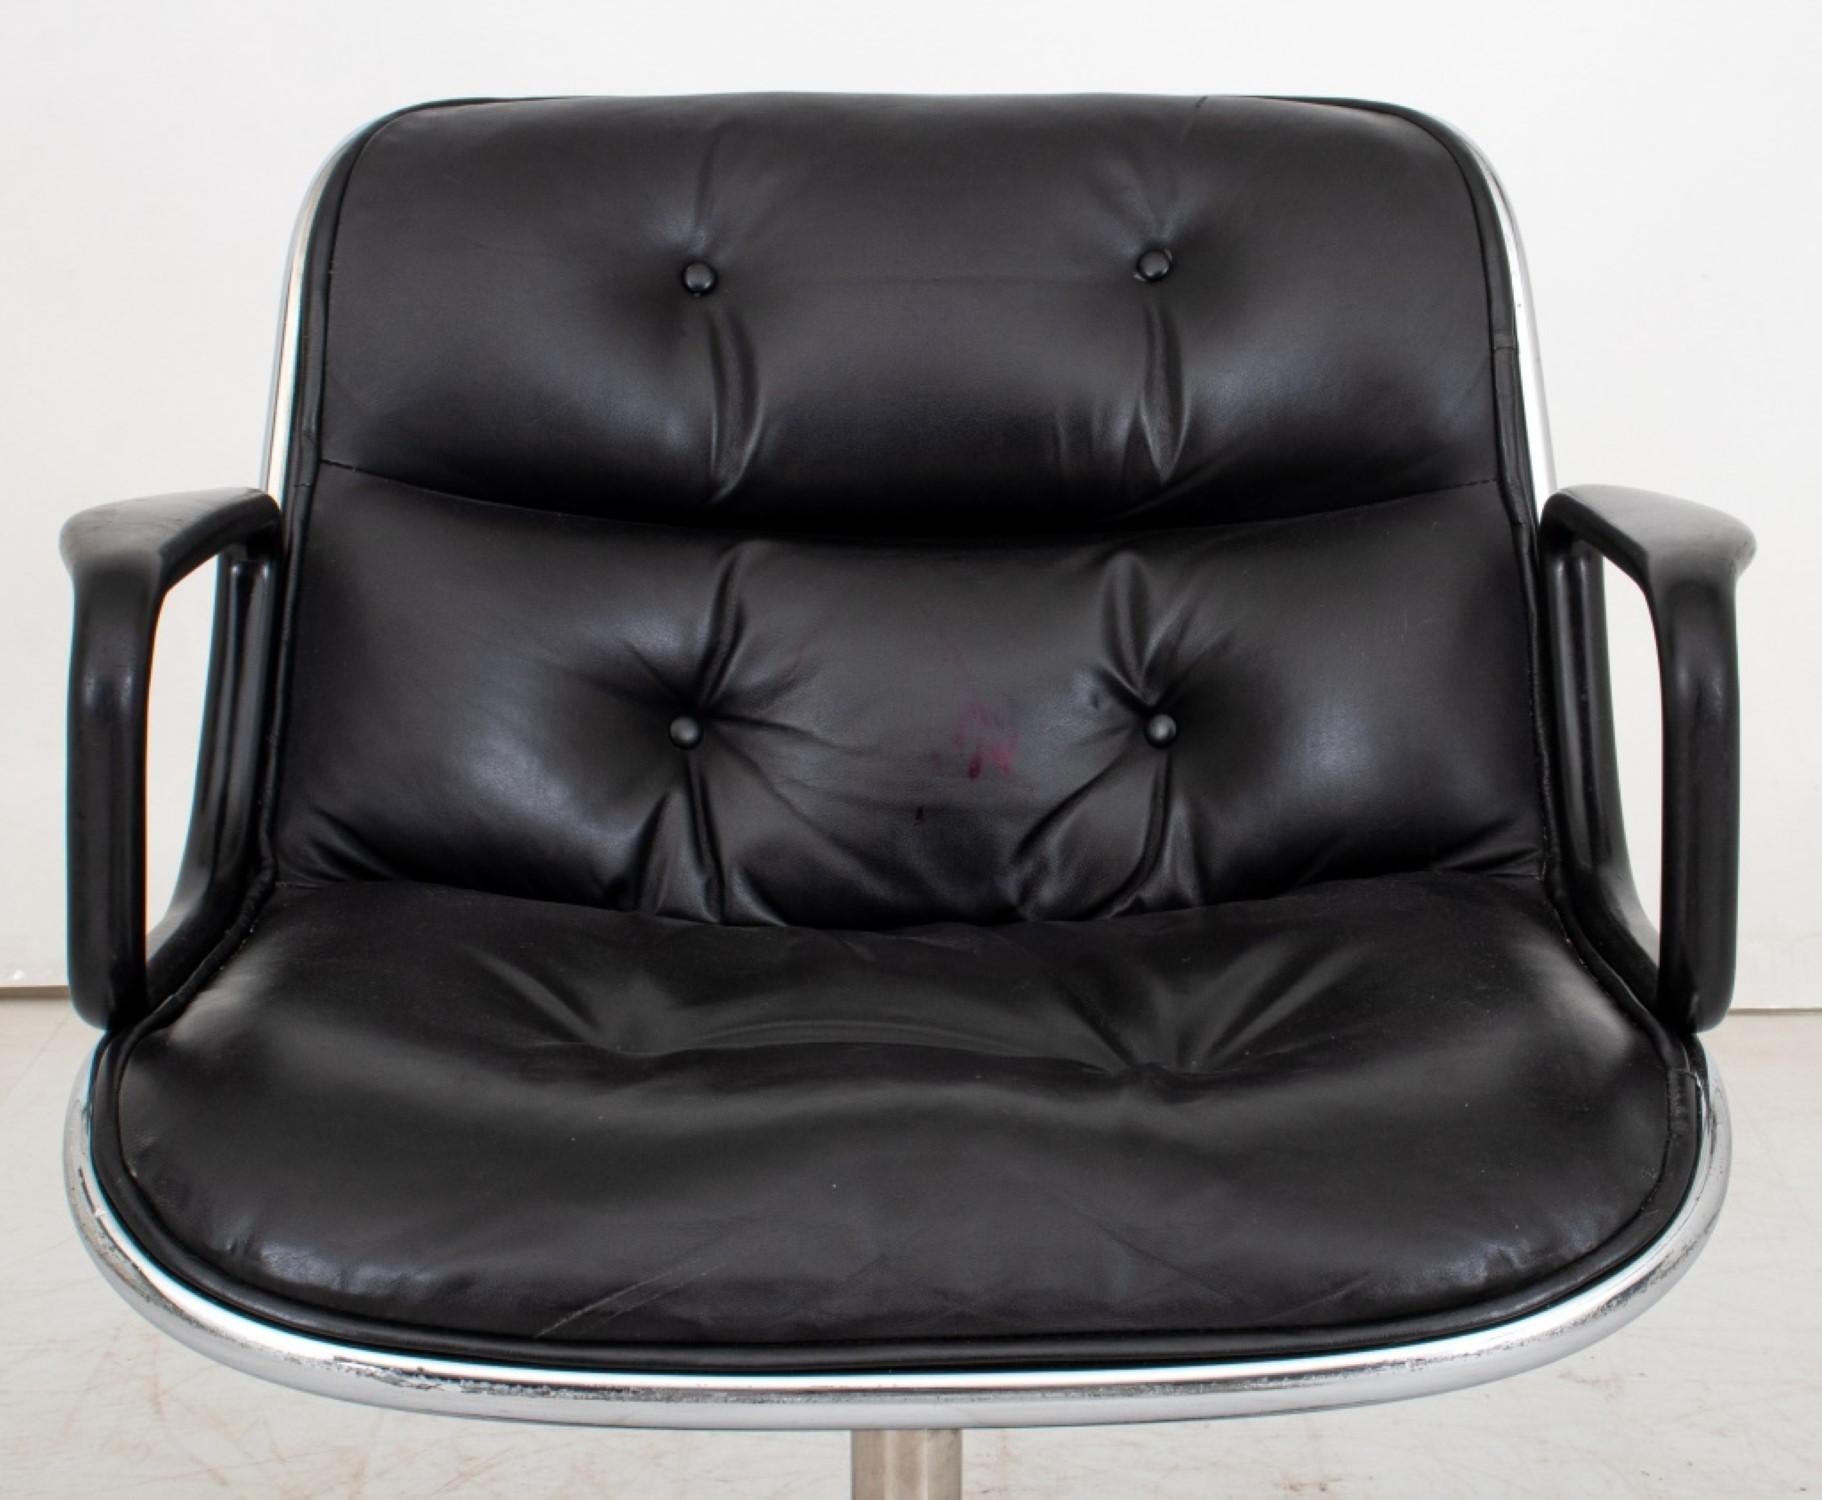 Charles Pollock Executive Office Chair for Knoll International (1963)

Design:
Button-tufted black leather seat and backing on a chrome base with four casters.

Dimensions: 32.25